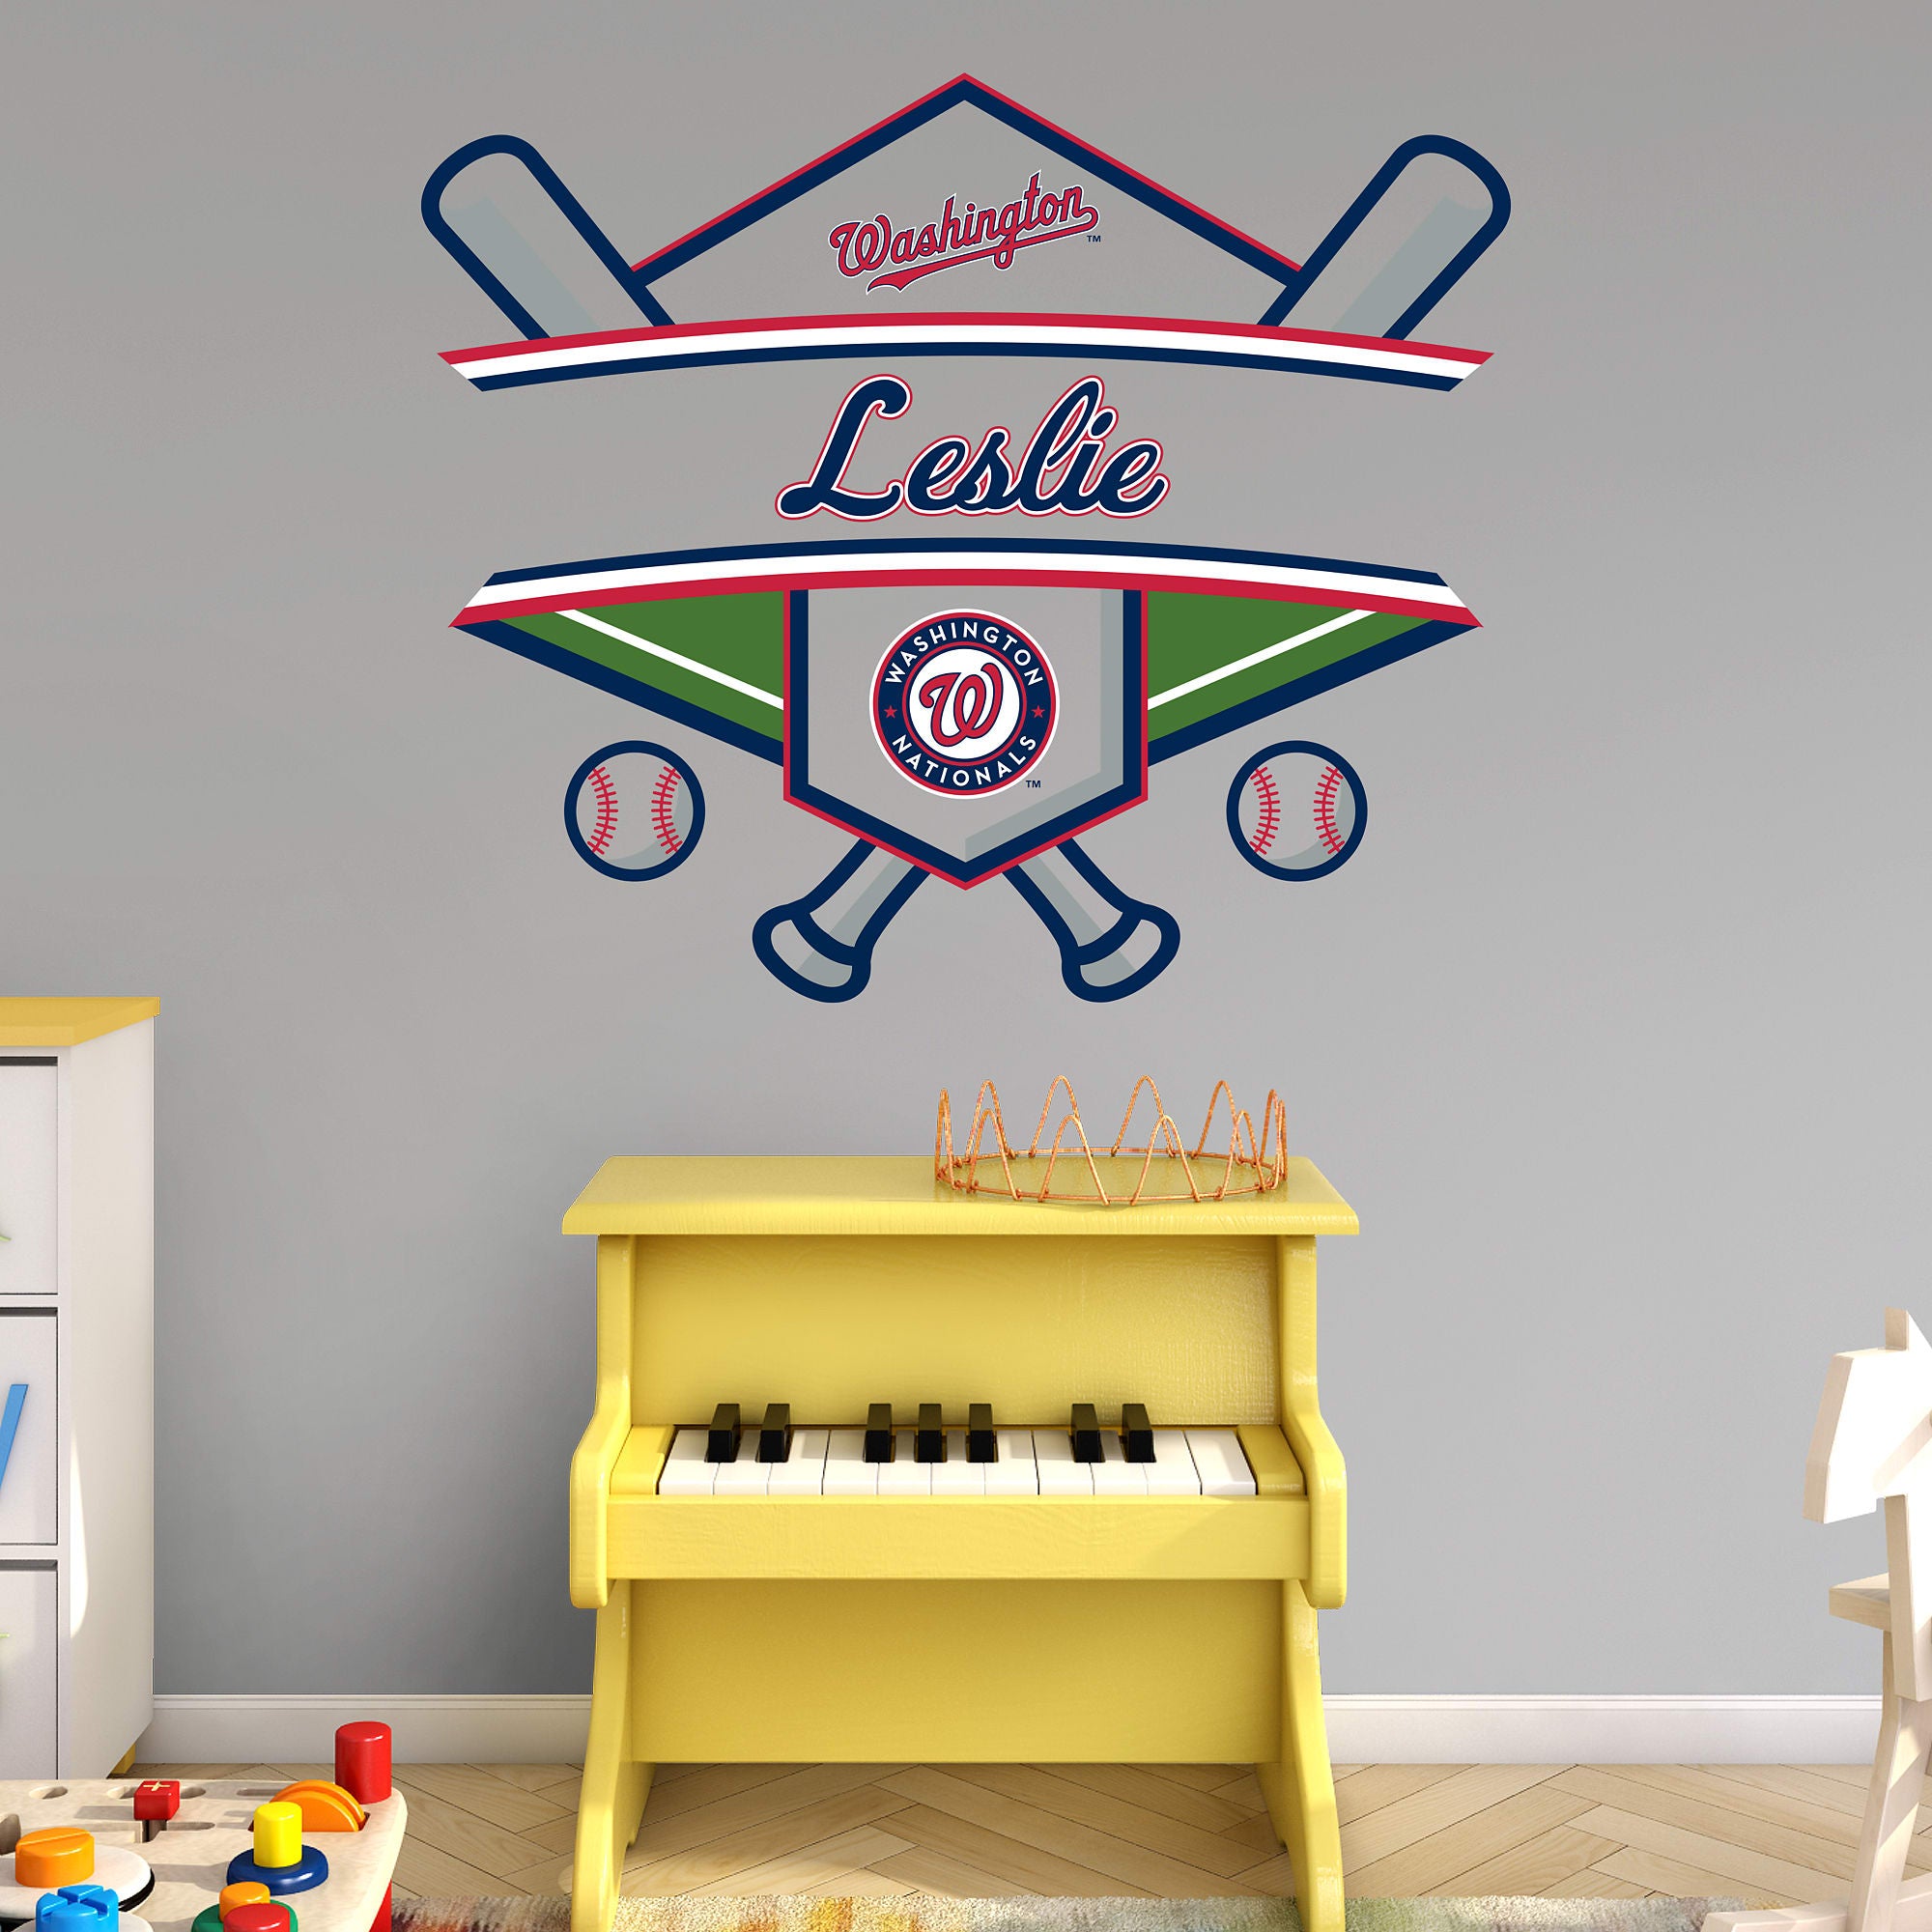 Washington Nationals: Personalized Name - Officially Licensed MLB Transfer Decal 45.0"W x 39.0"H by Fathead | Vinyl